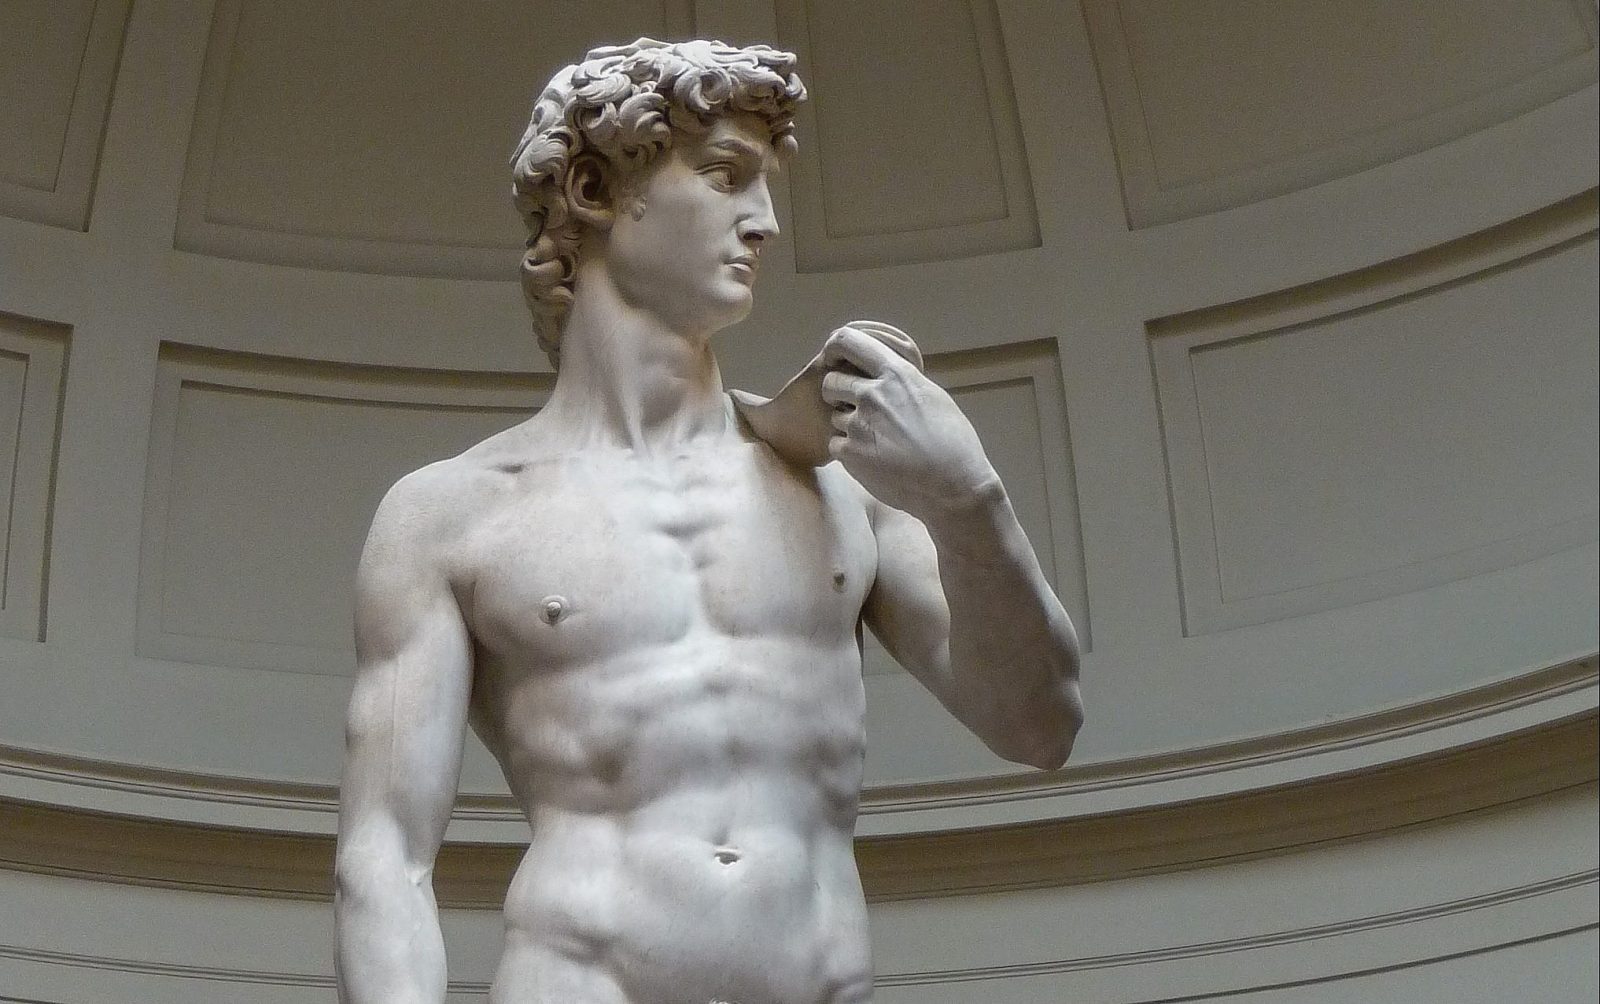 Not Even Masters of General Knowledge Can Get a Perfect Score on This Quiz. Can You? Michelangelo